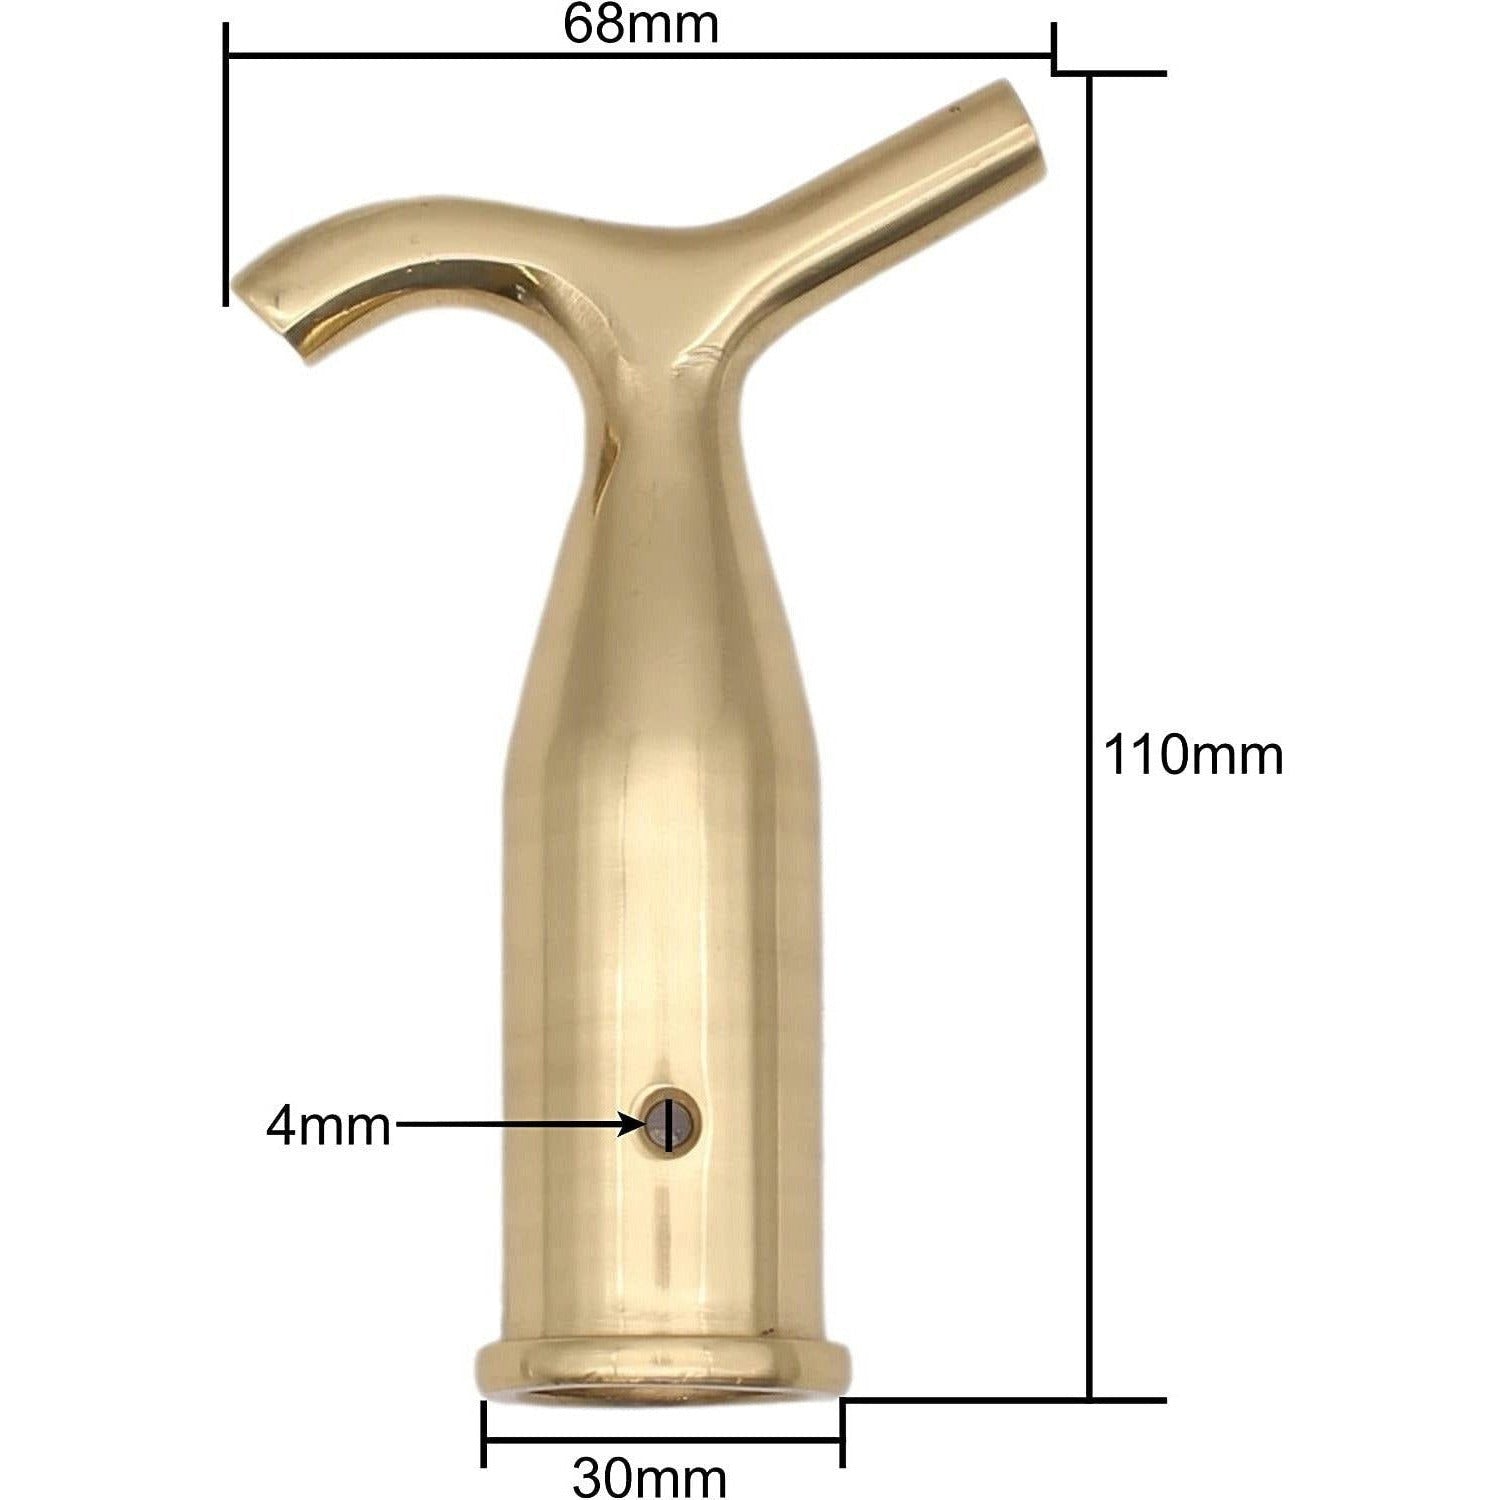 Pole Hook For Fanlight Window Catches - Polished Brass (Lacquered)